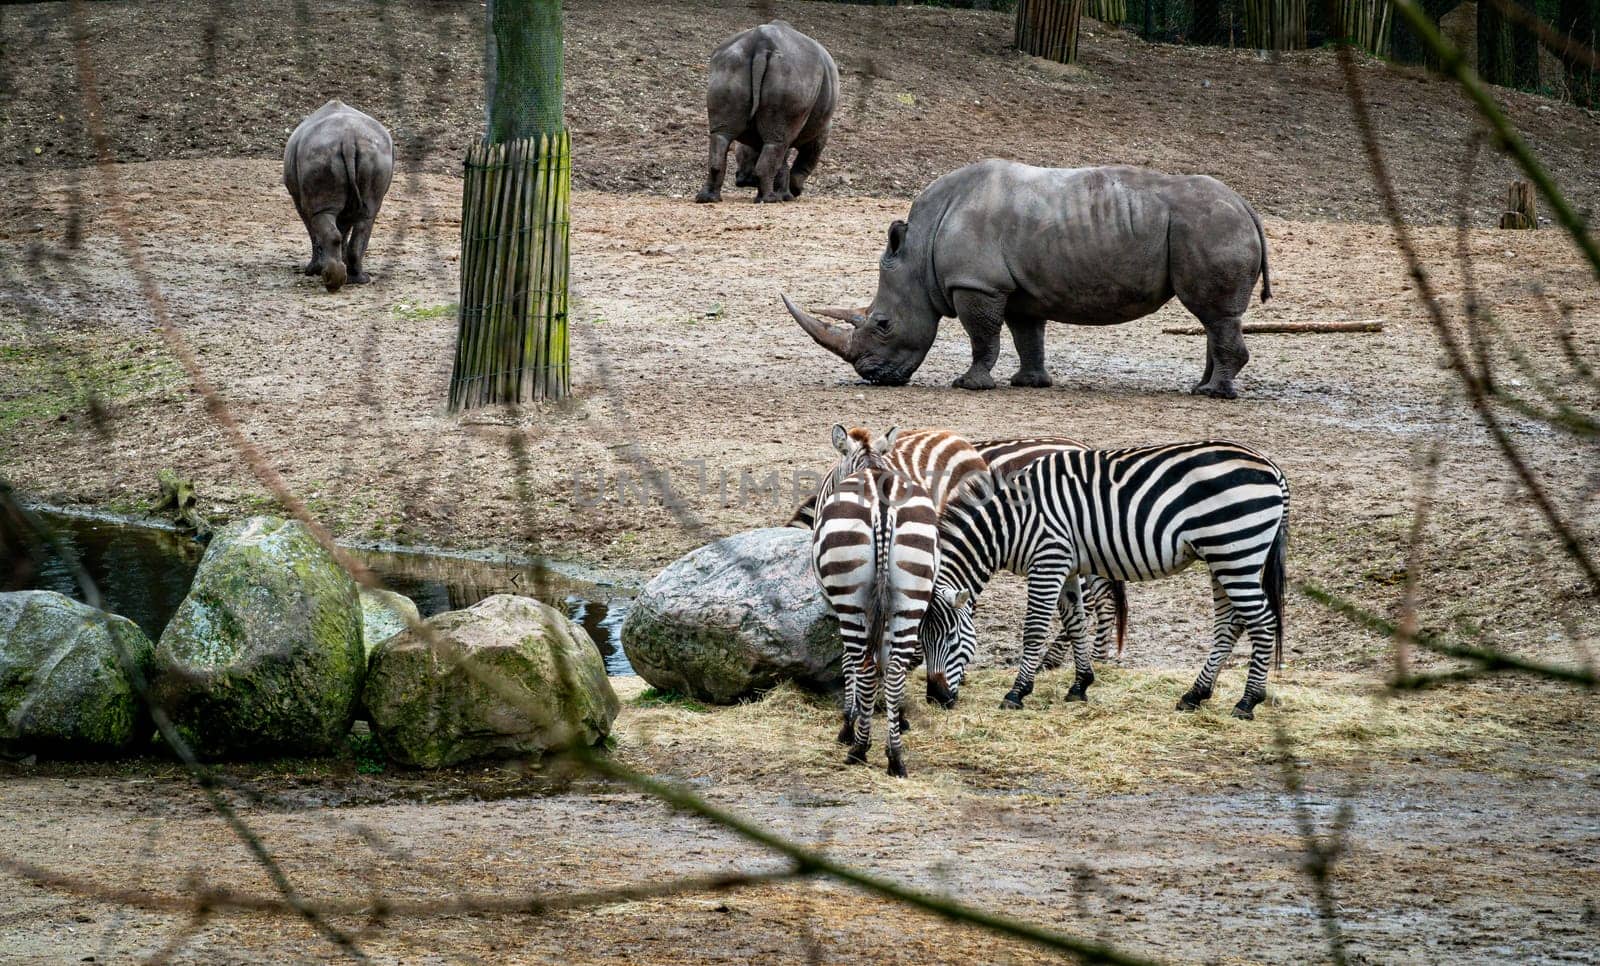 rhino and zebras near a water hole in zoo by compuinfoto